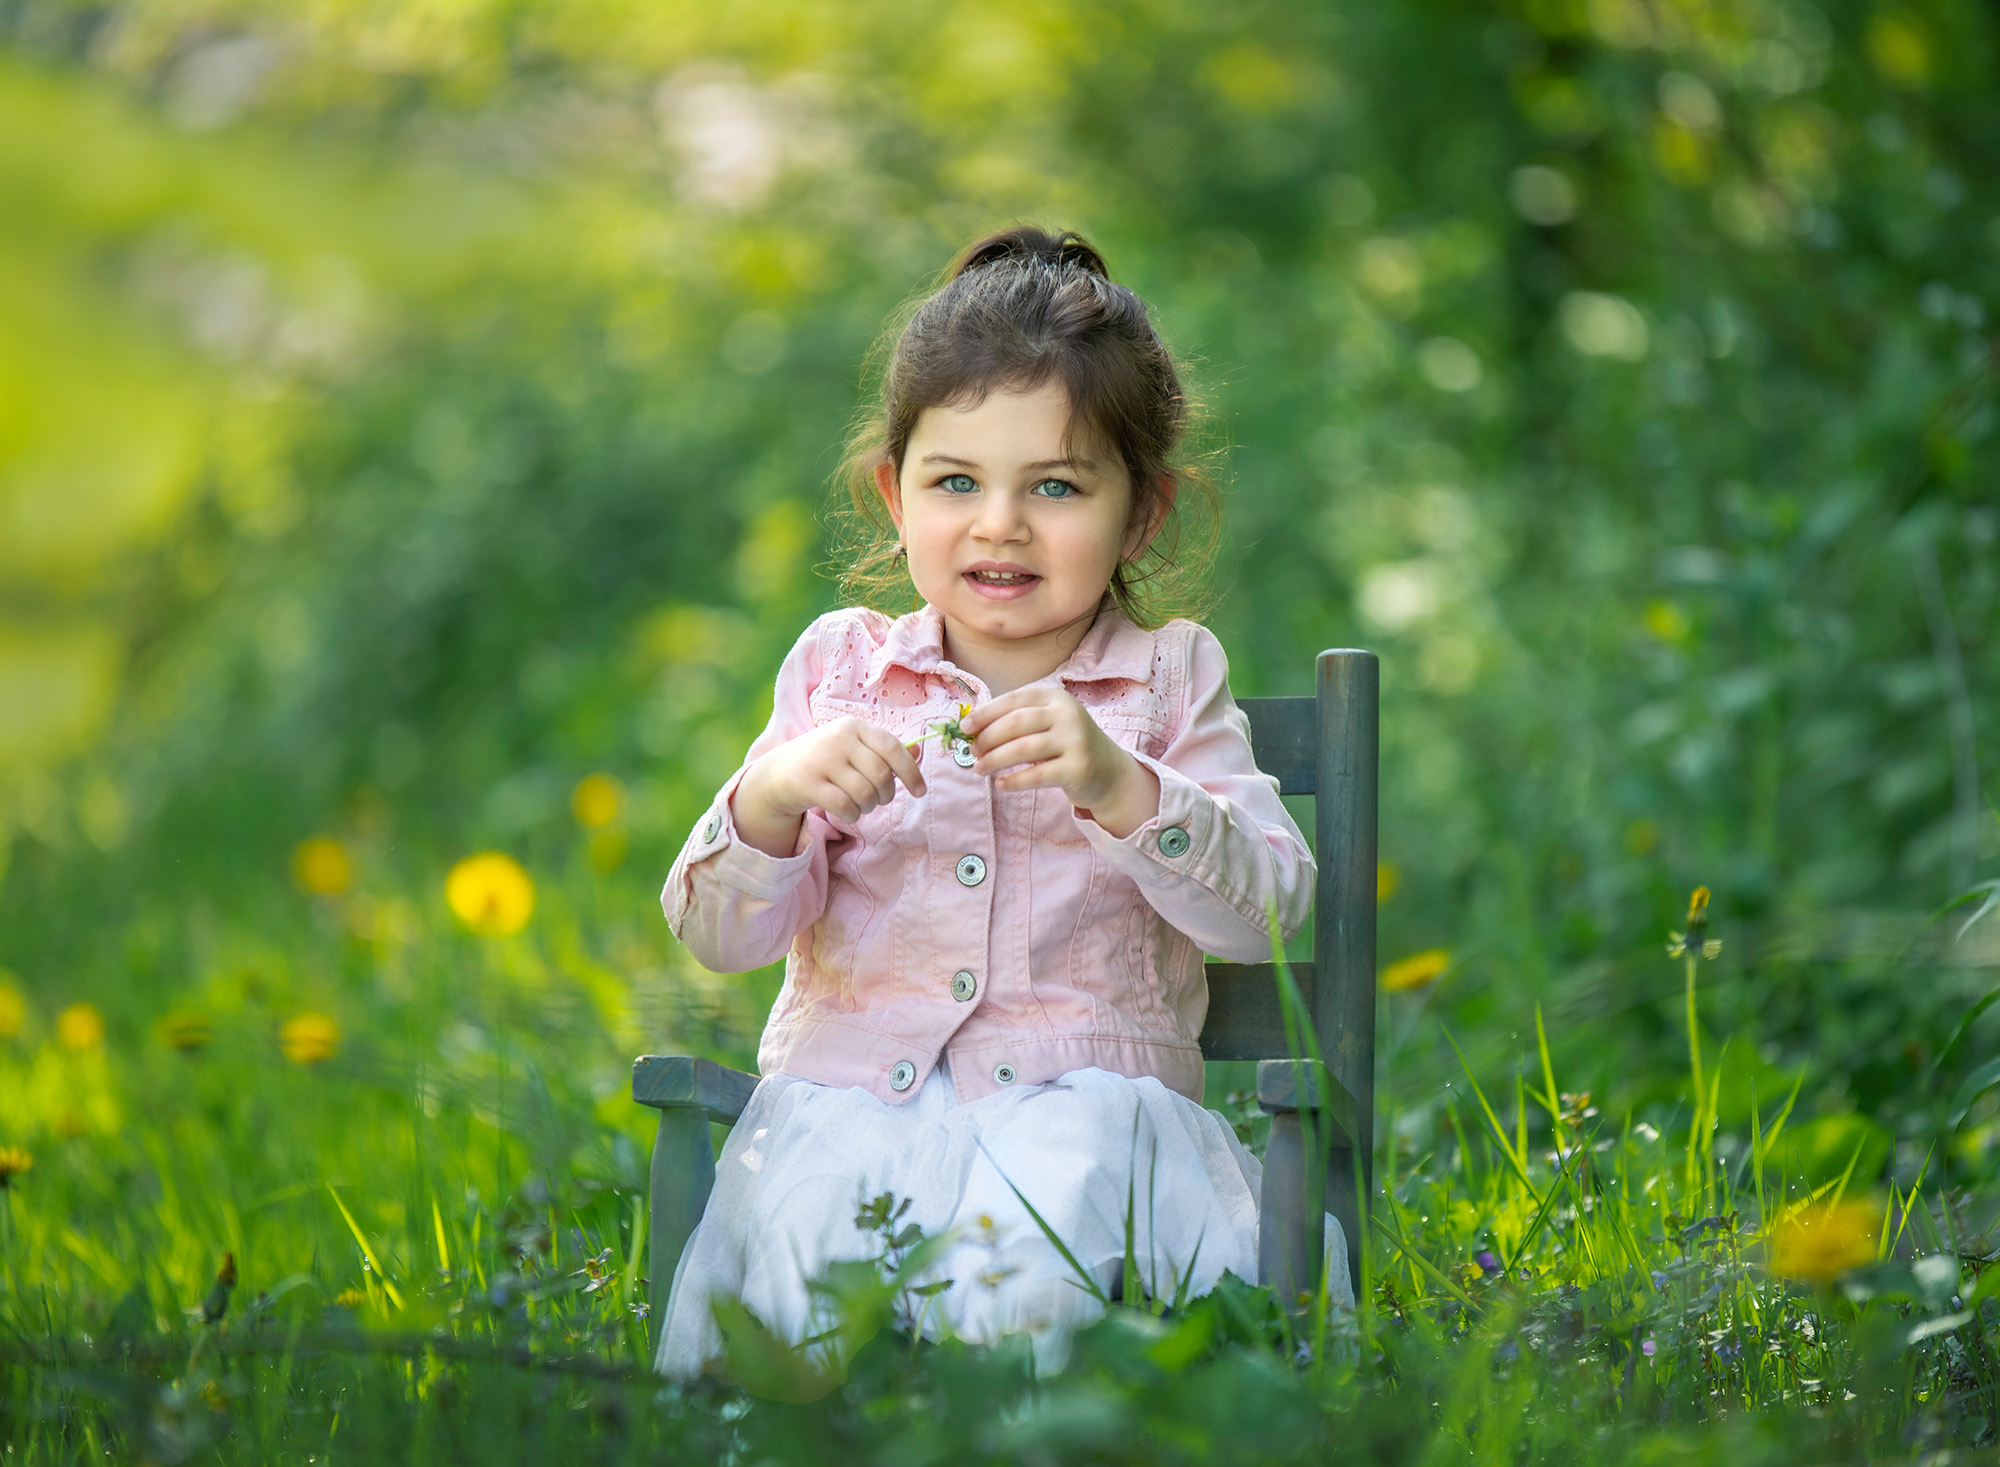 Summer Family Photos young girl sitting in rustic chair in dandelion field